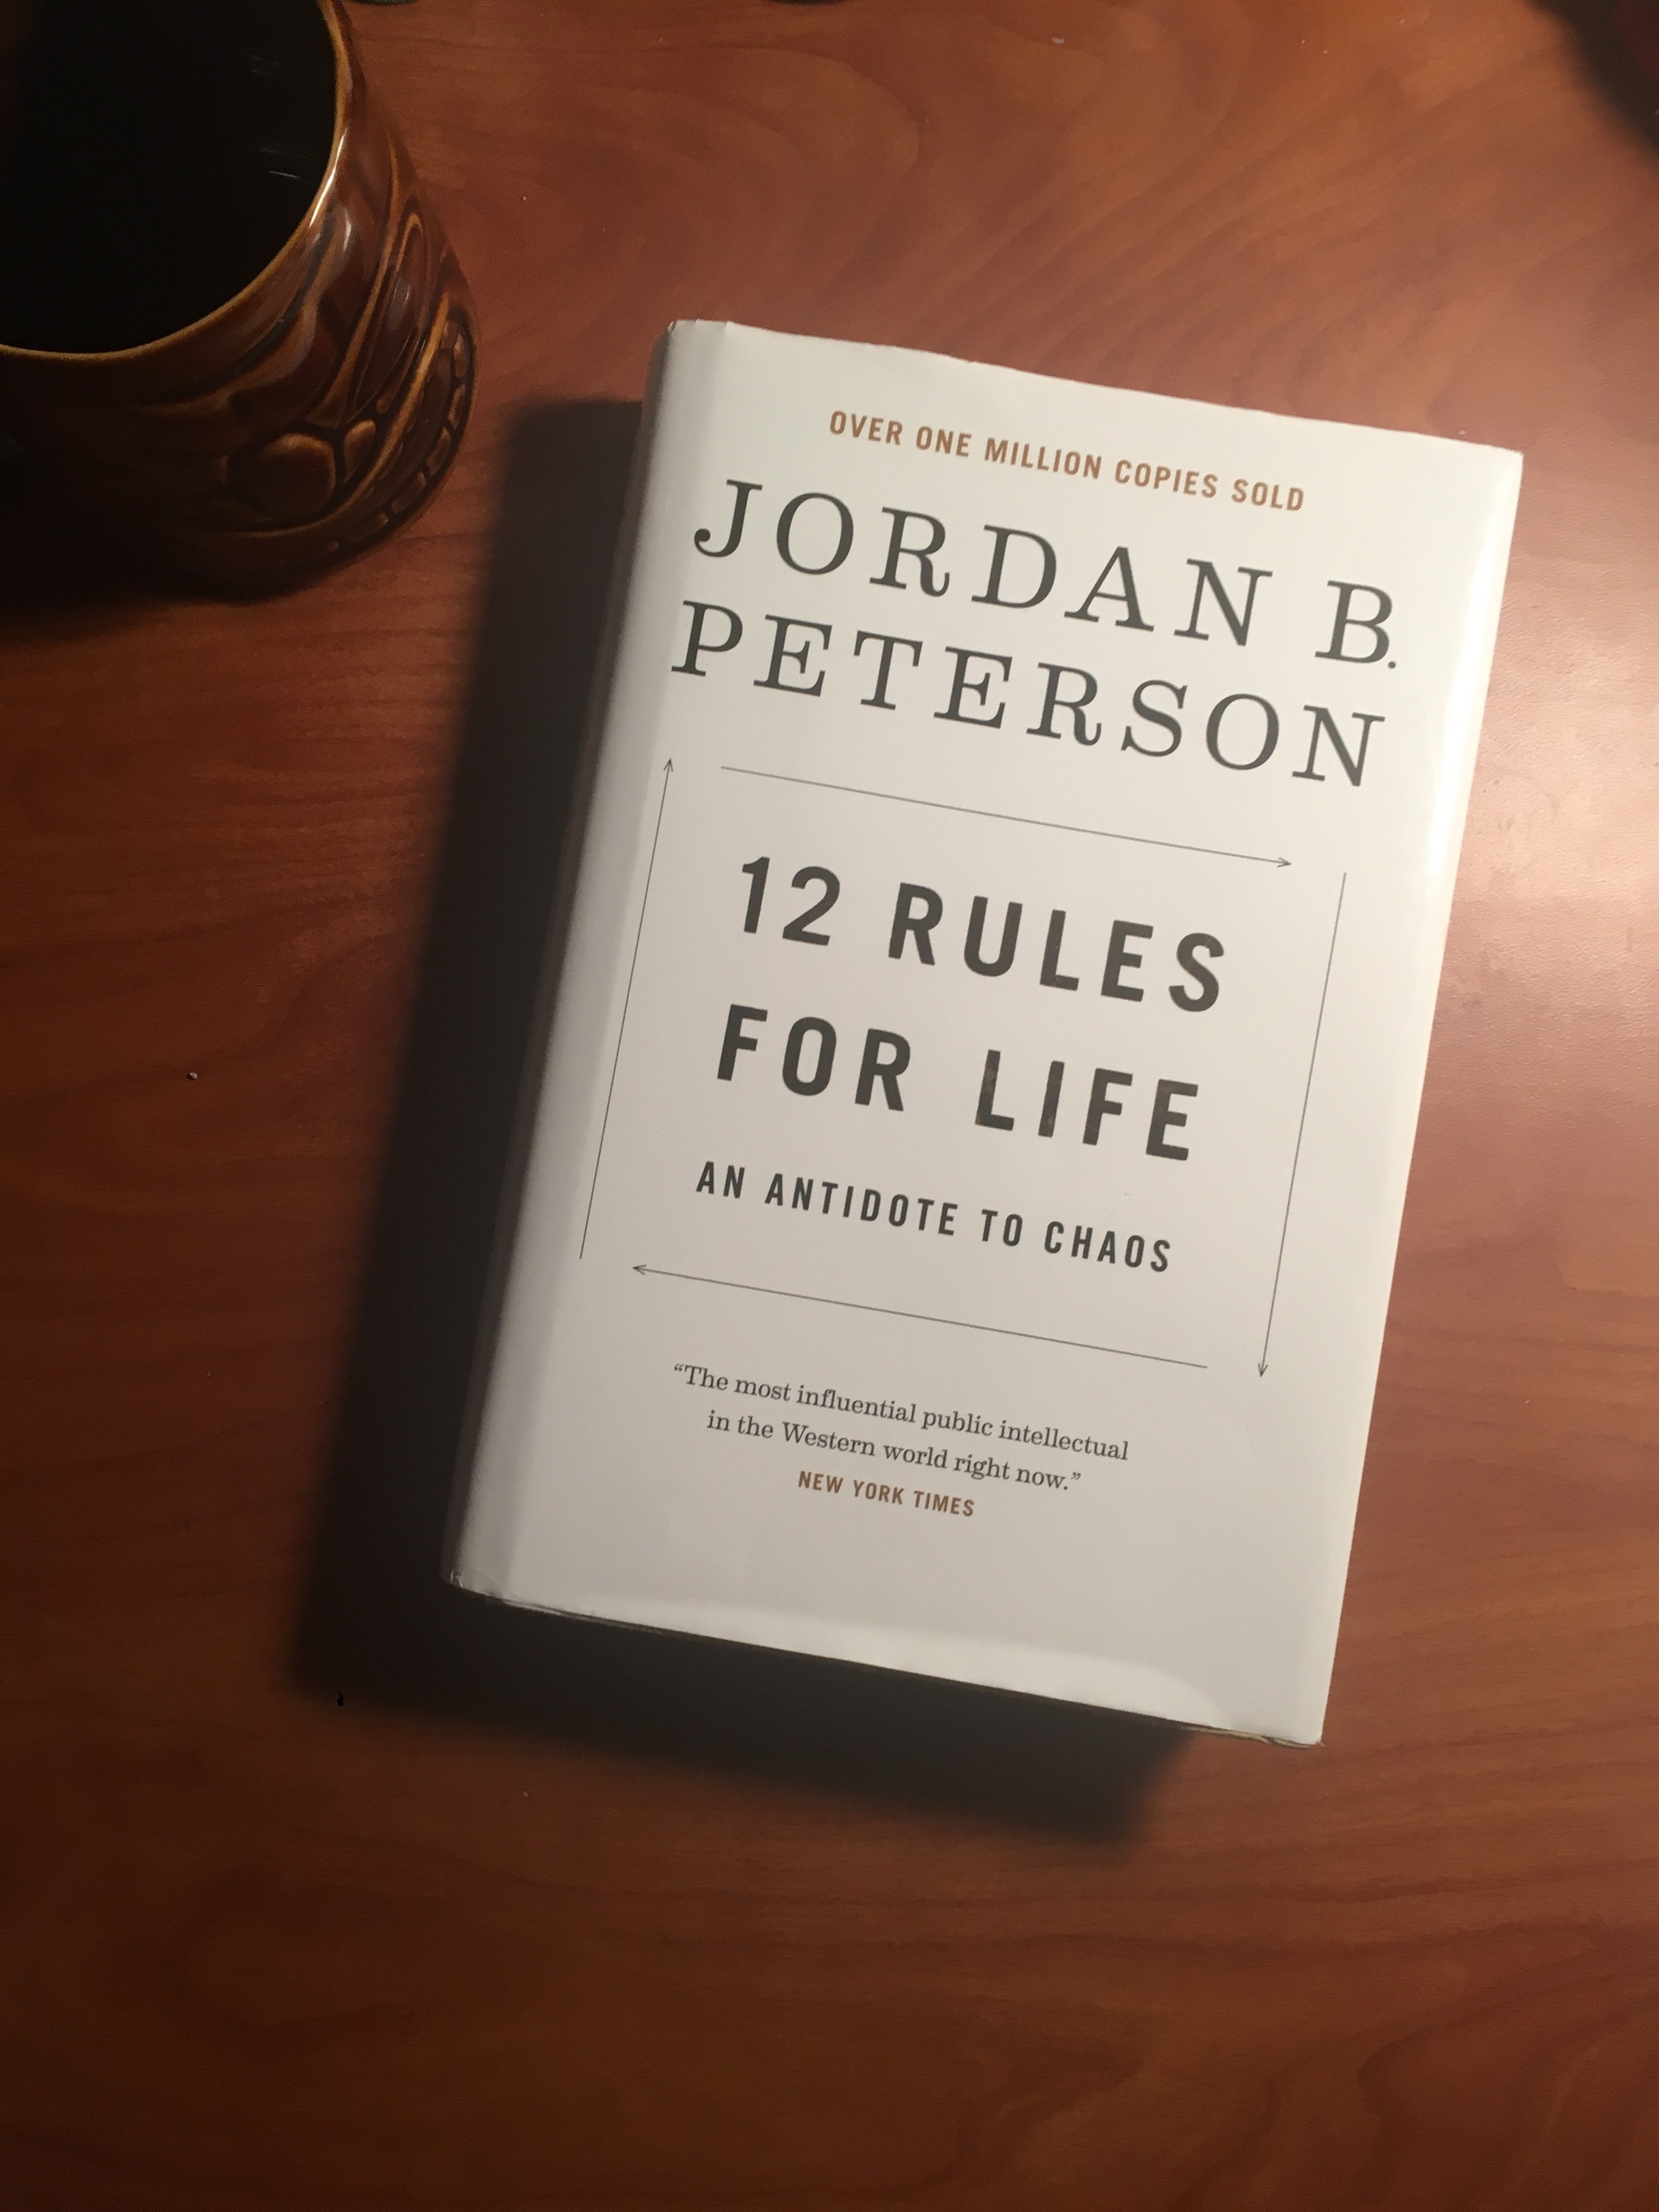 Den aktuelle Kriger Nybegynder Book review: 12 Rules for Life - The Spectator